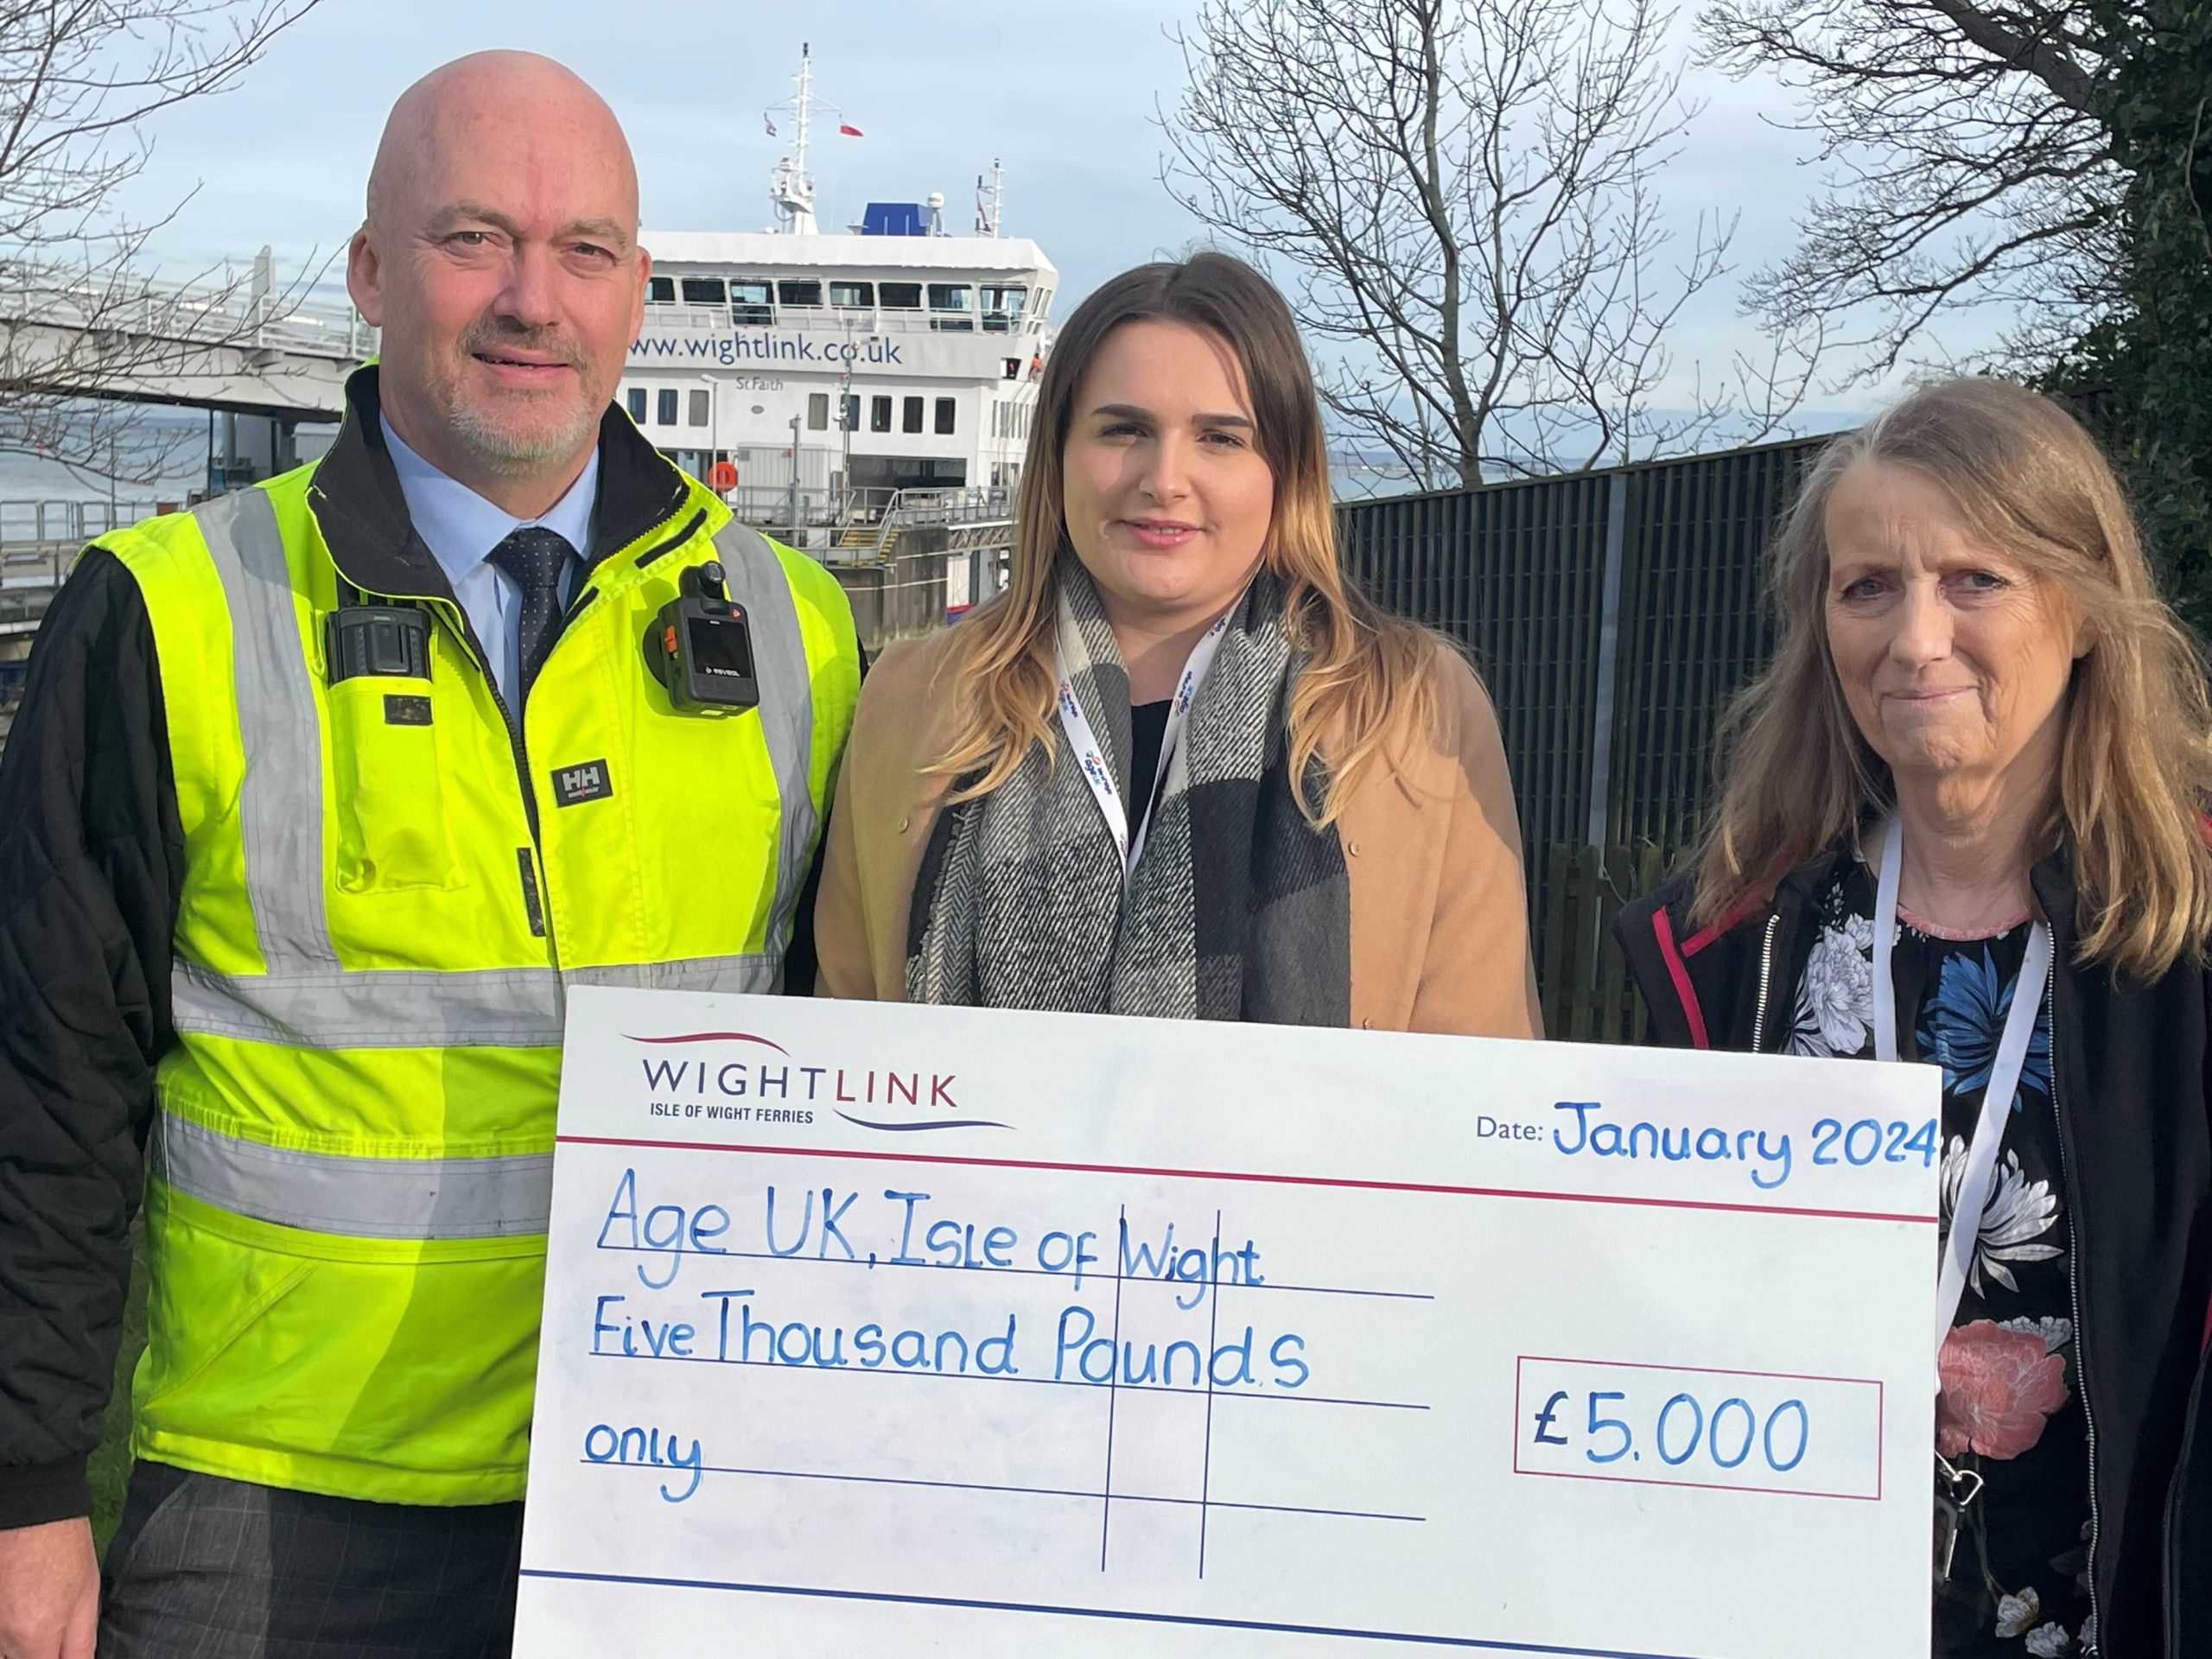 A male Wightlink worker in a high visibility jacket hands a giant cheque to two women, in front of a Wightlink ferry